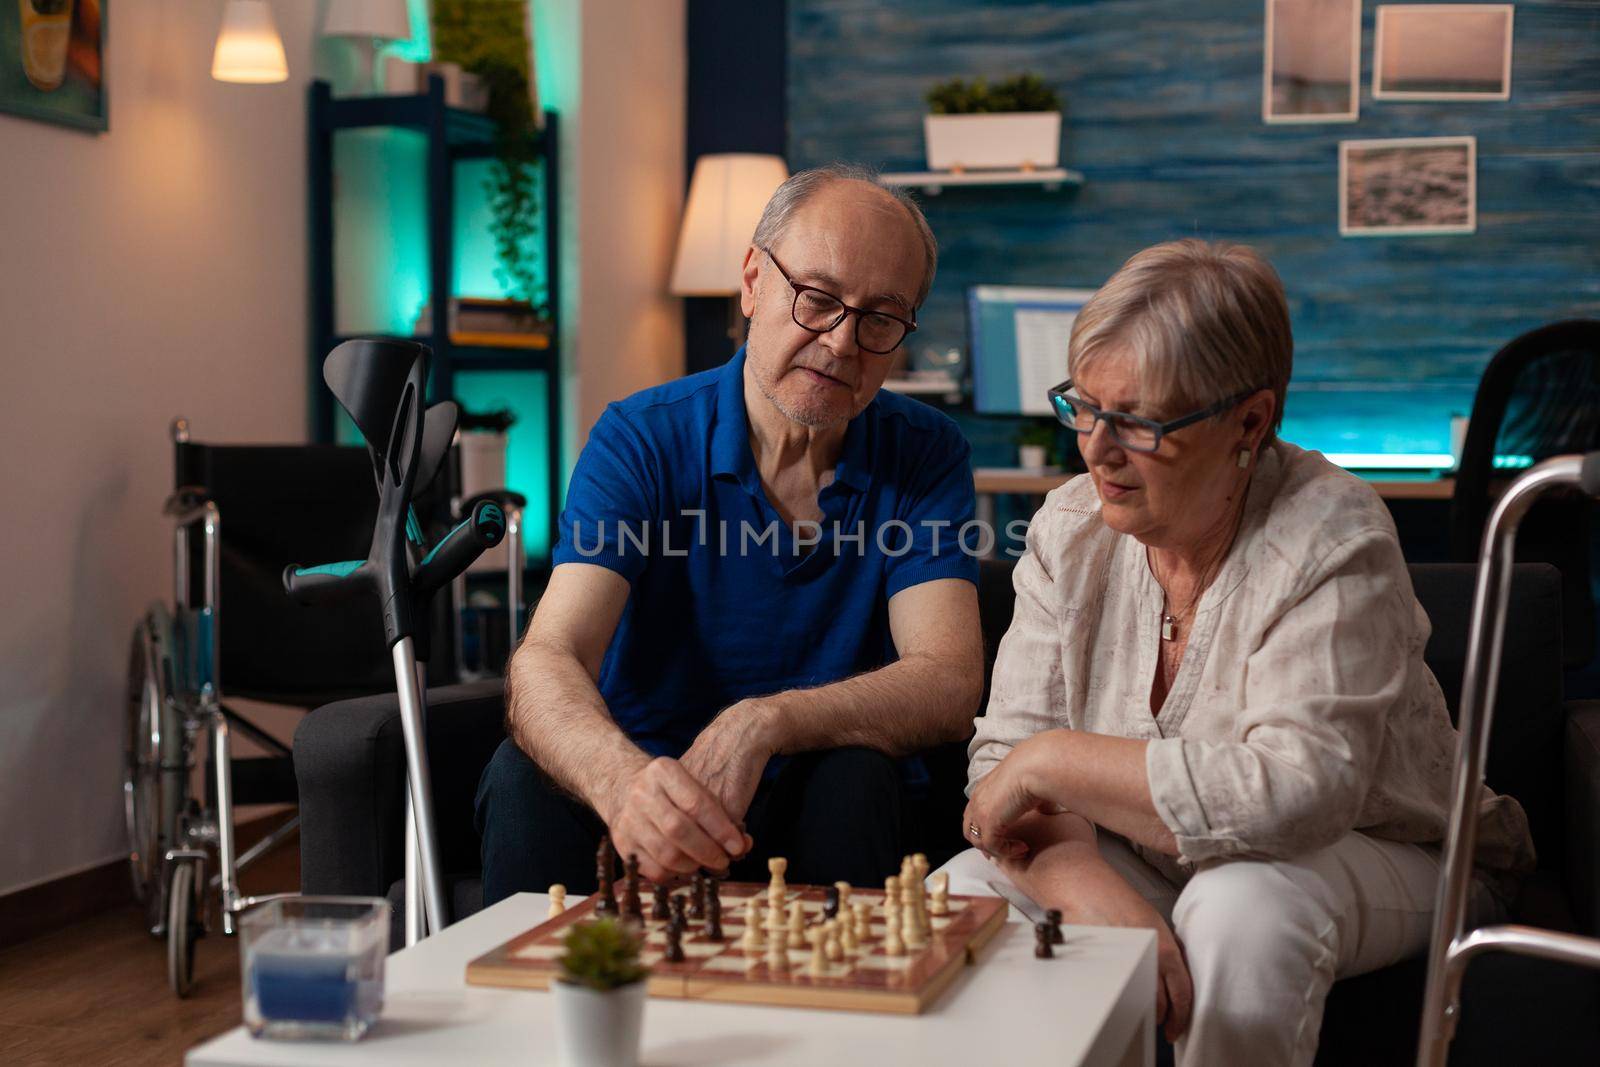 Senior people enjoying retirement with chess game on coffee table in living room. Elderly couple sitting on couch with chessboard playing together for entertainment and fun at home